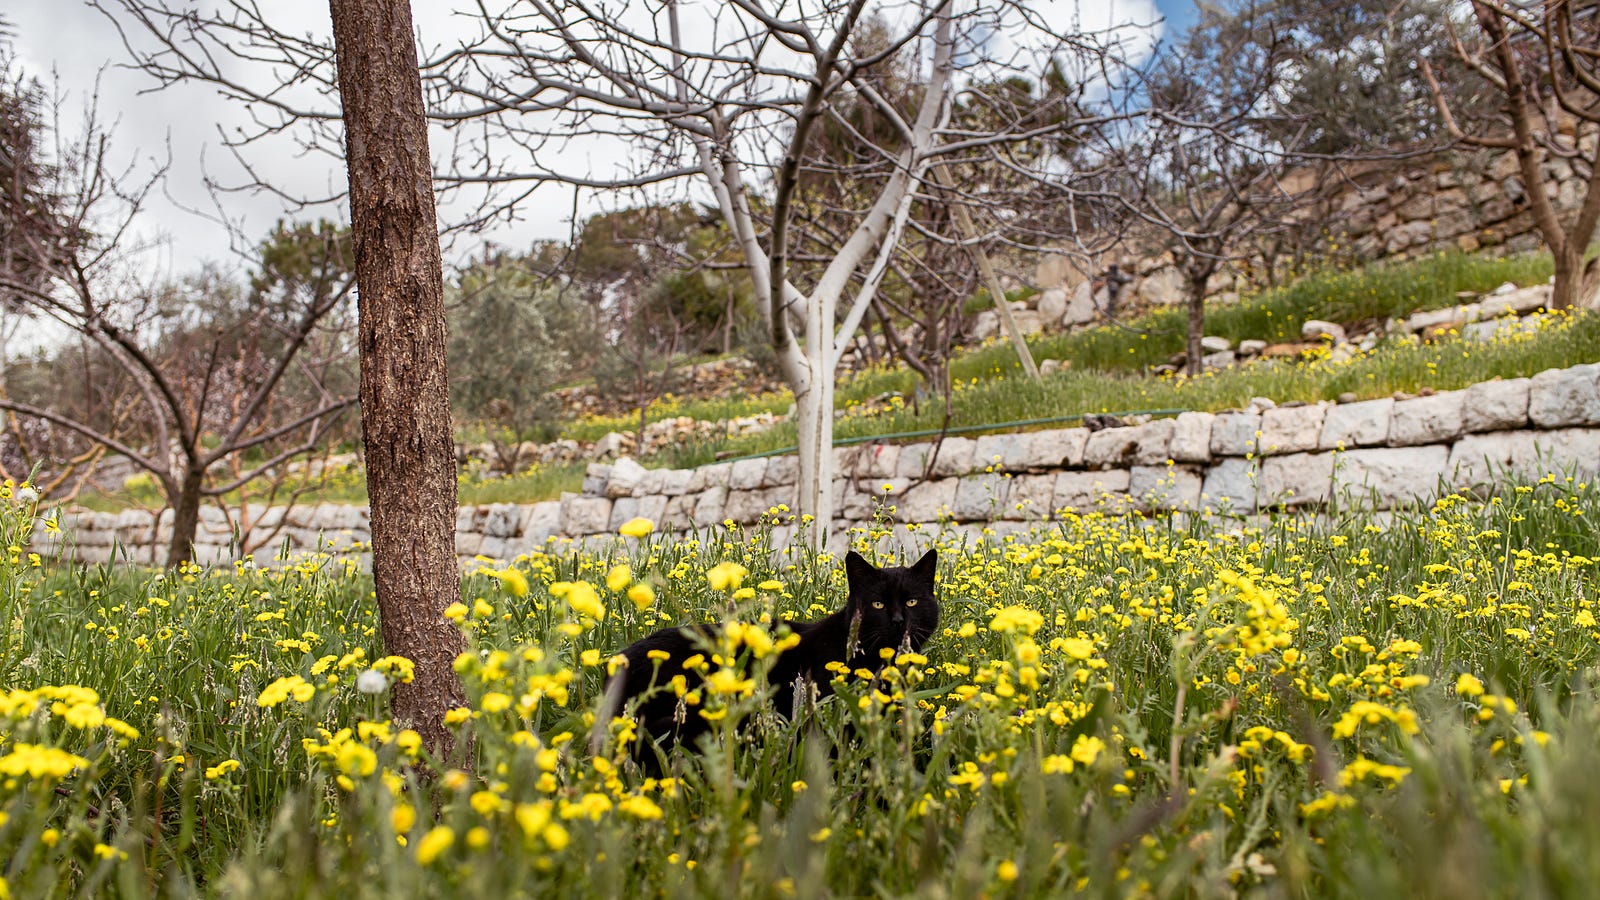 A black kitty wanders through a small yard of yellow flowers in rural Lebanon.